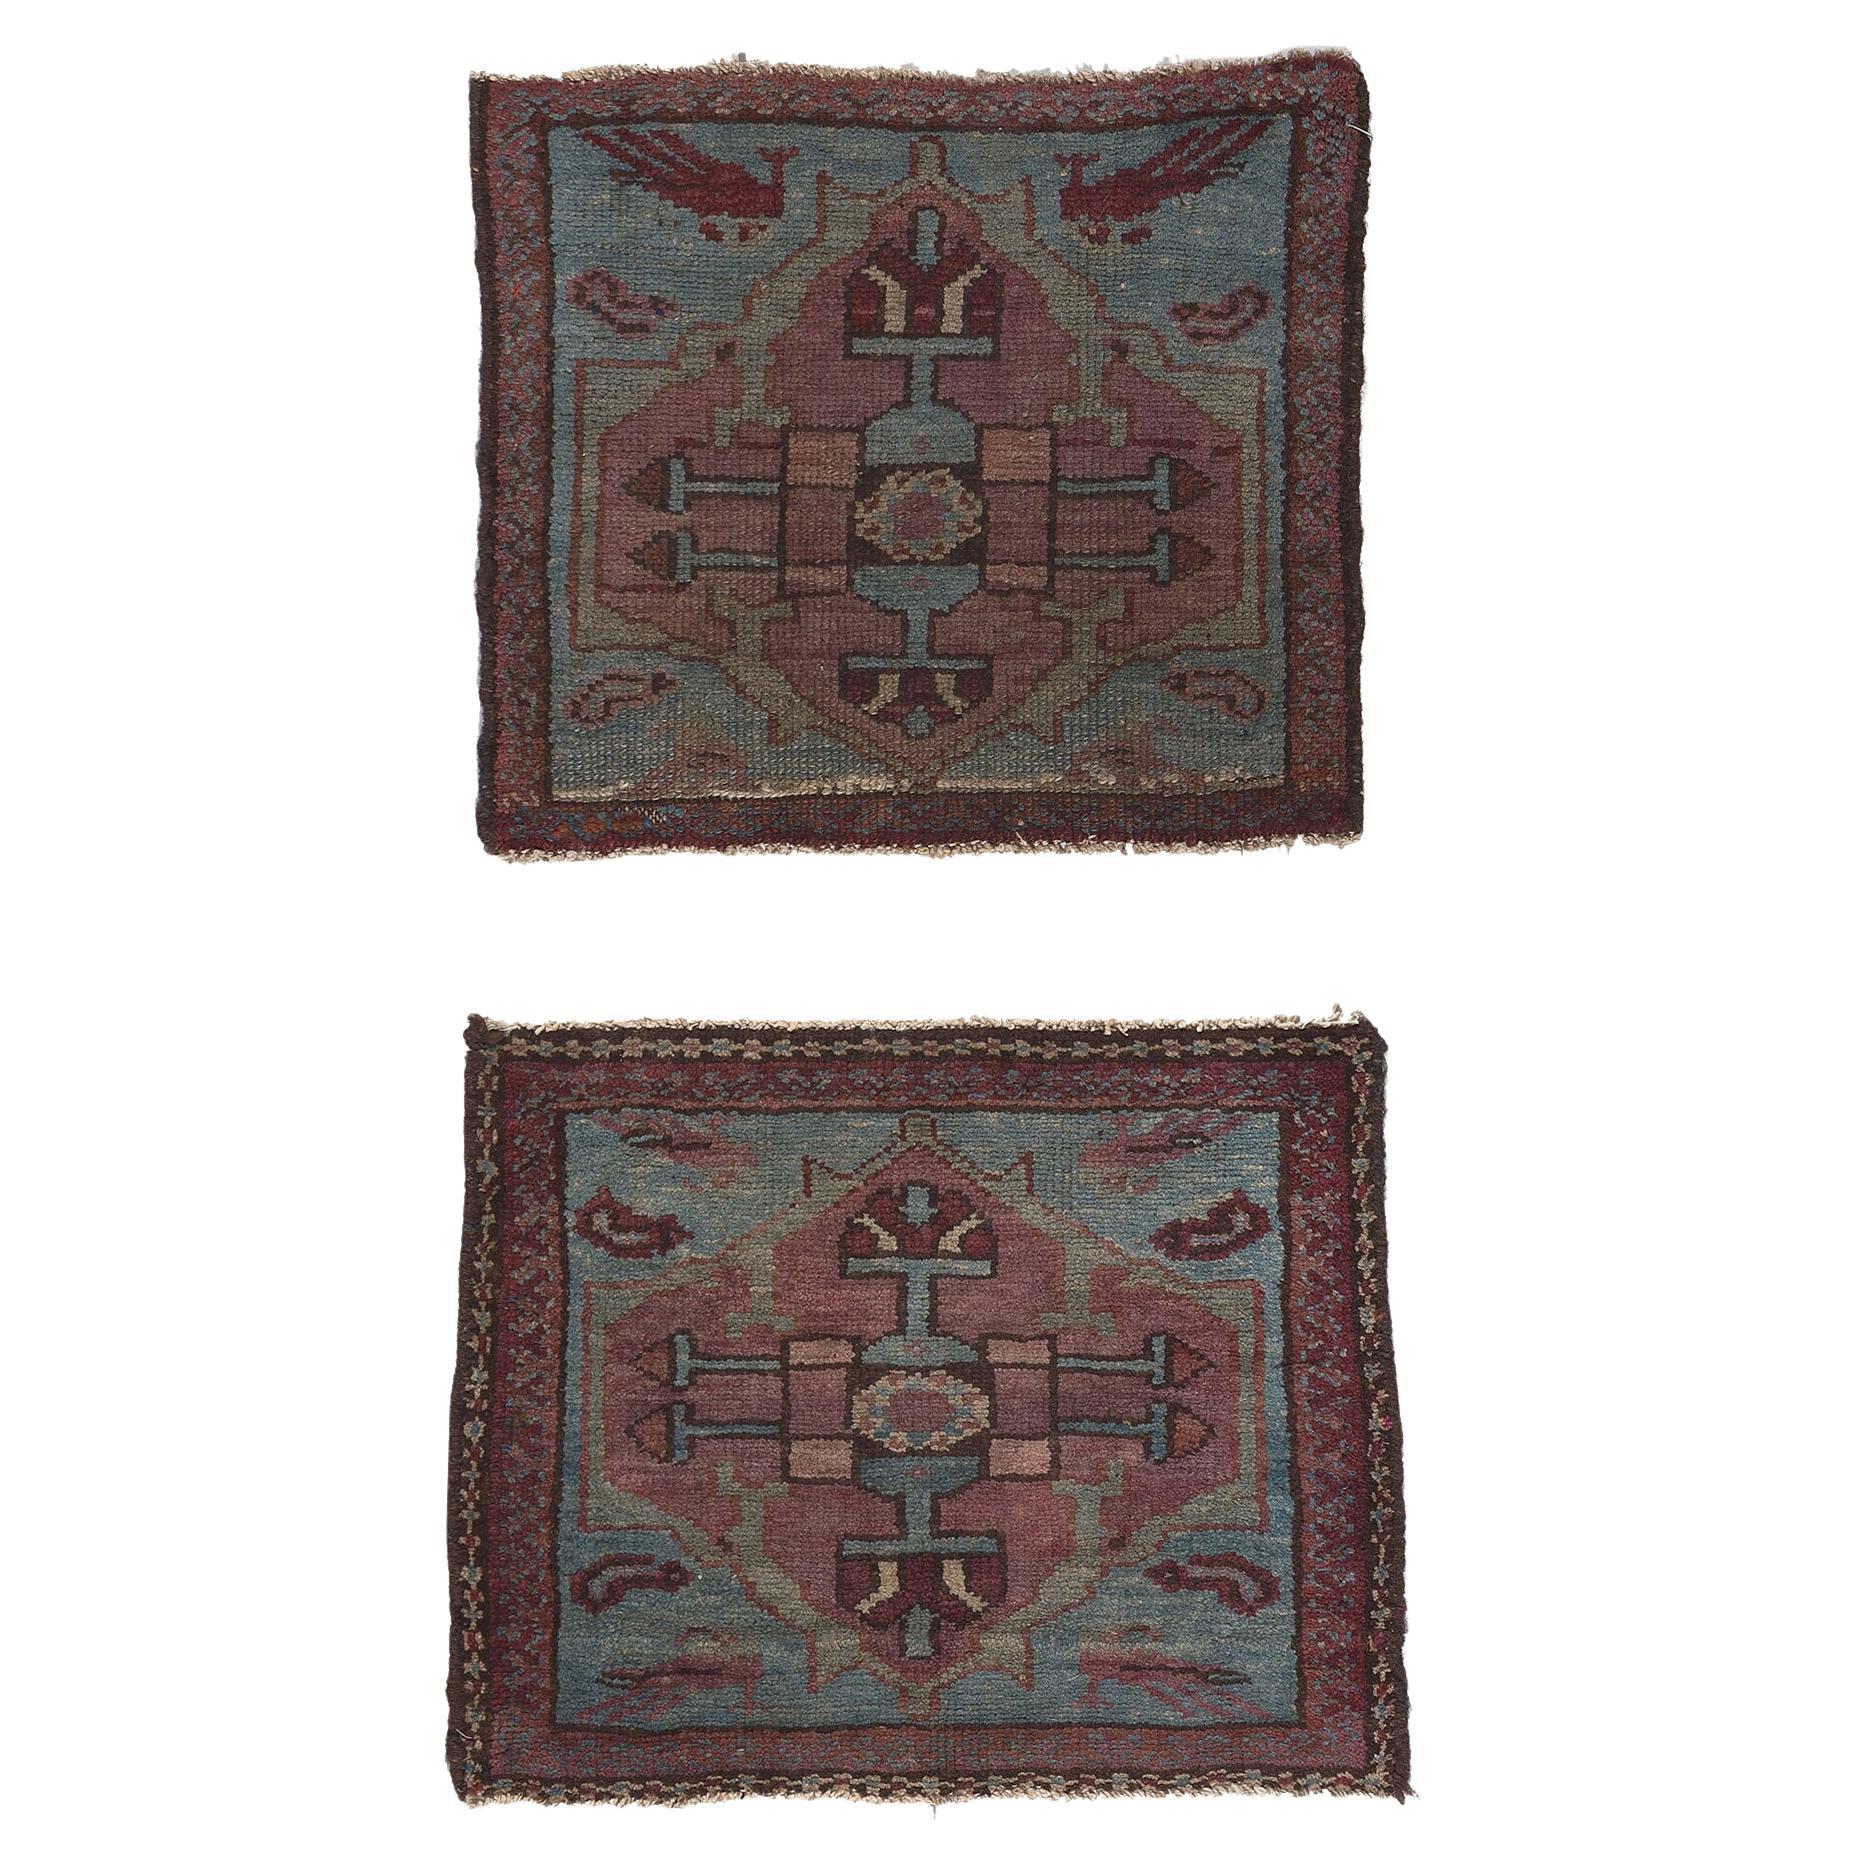 A Matching Pair of Small Antique Persian Malayer Rugs